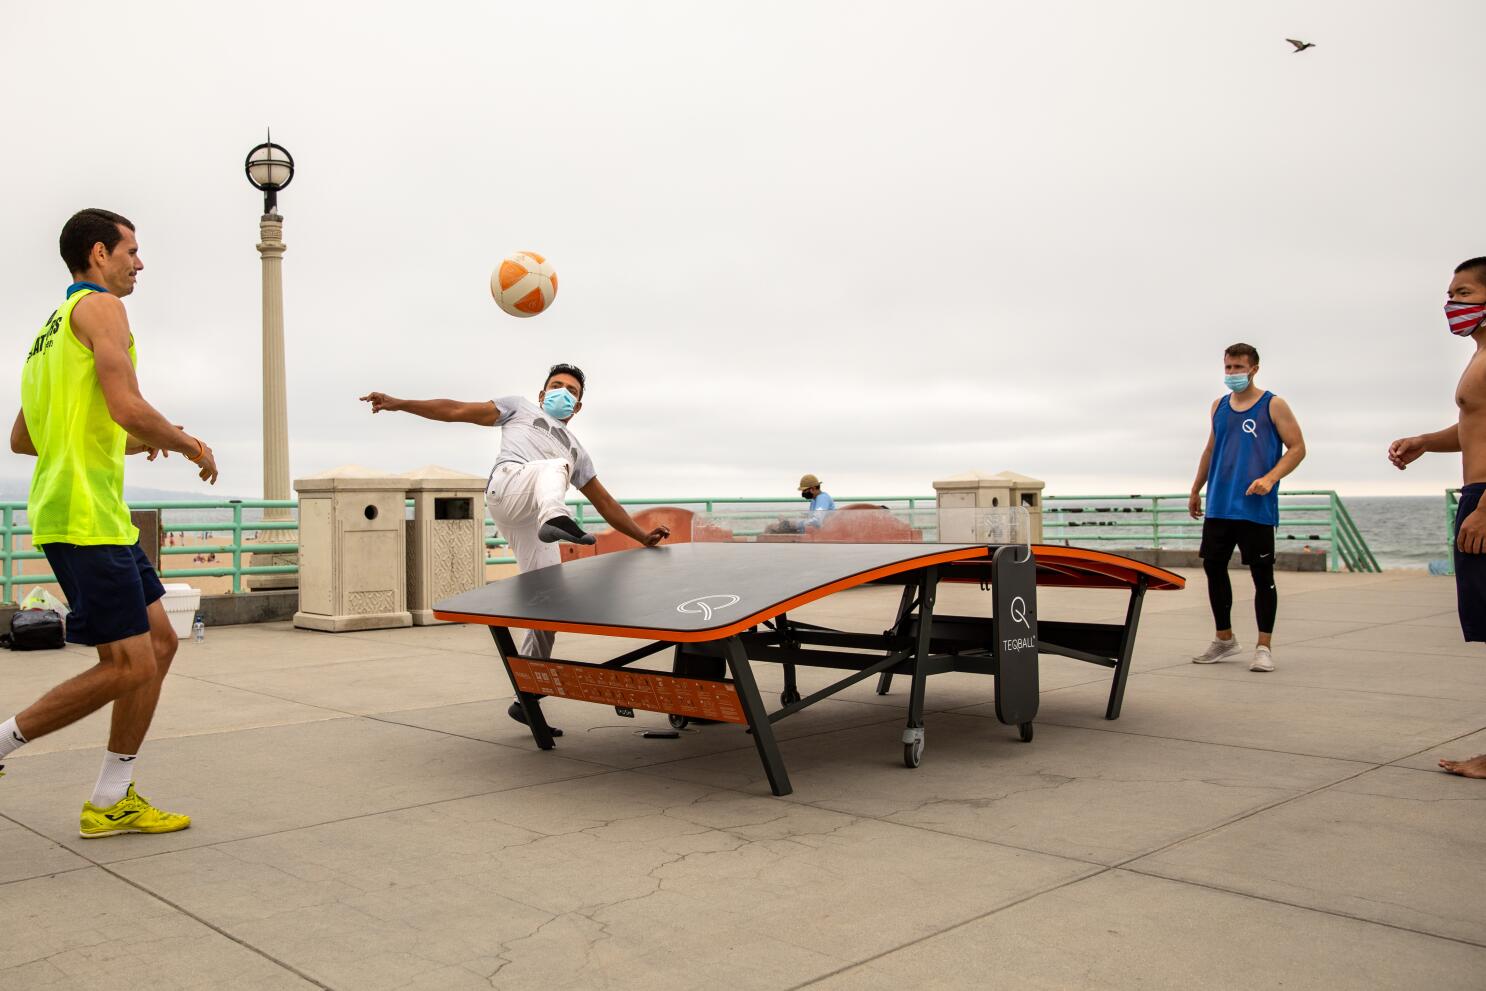 The Art of Ping Pong combines art and play